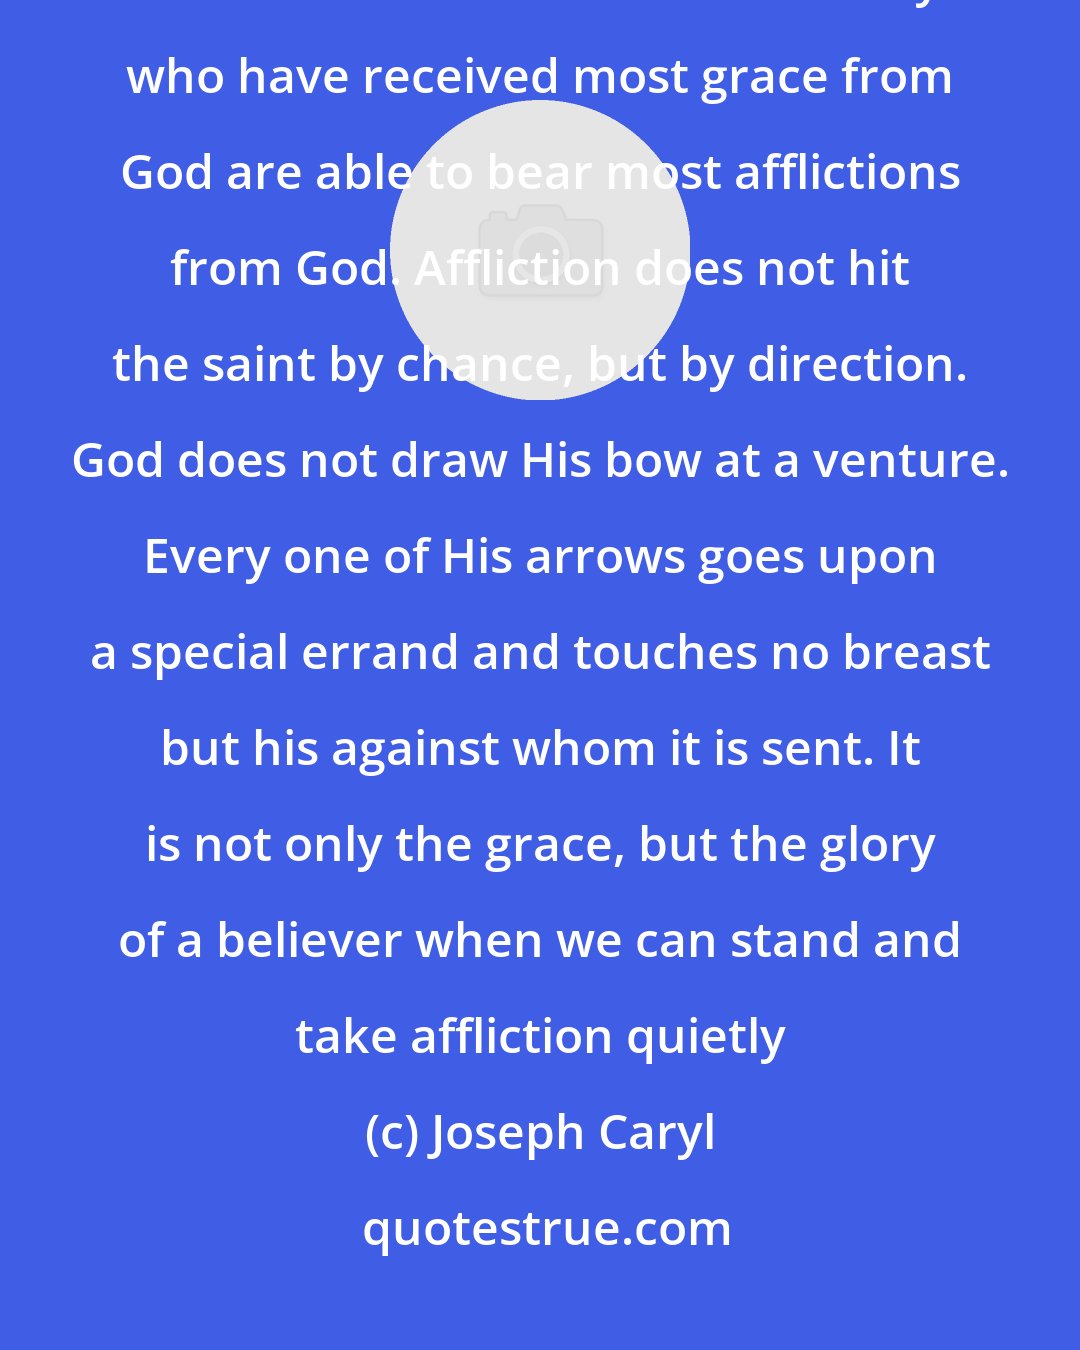 Joseph Caryl: God takes the most eminent and choicest of His servants for the choicest and most eminent afflictions. They who have received most grace from God are able to bear most afflictions from God. Affliction does not hit the saint by chance, but by direction. God does not draw His bow at a venture. Every one of His arrows goes upon a special errand and touches no breast but his against whom it is sent. It is not only the grace, but the glory of a believer when we can stand and take affliction quietly